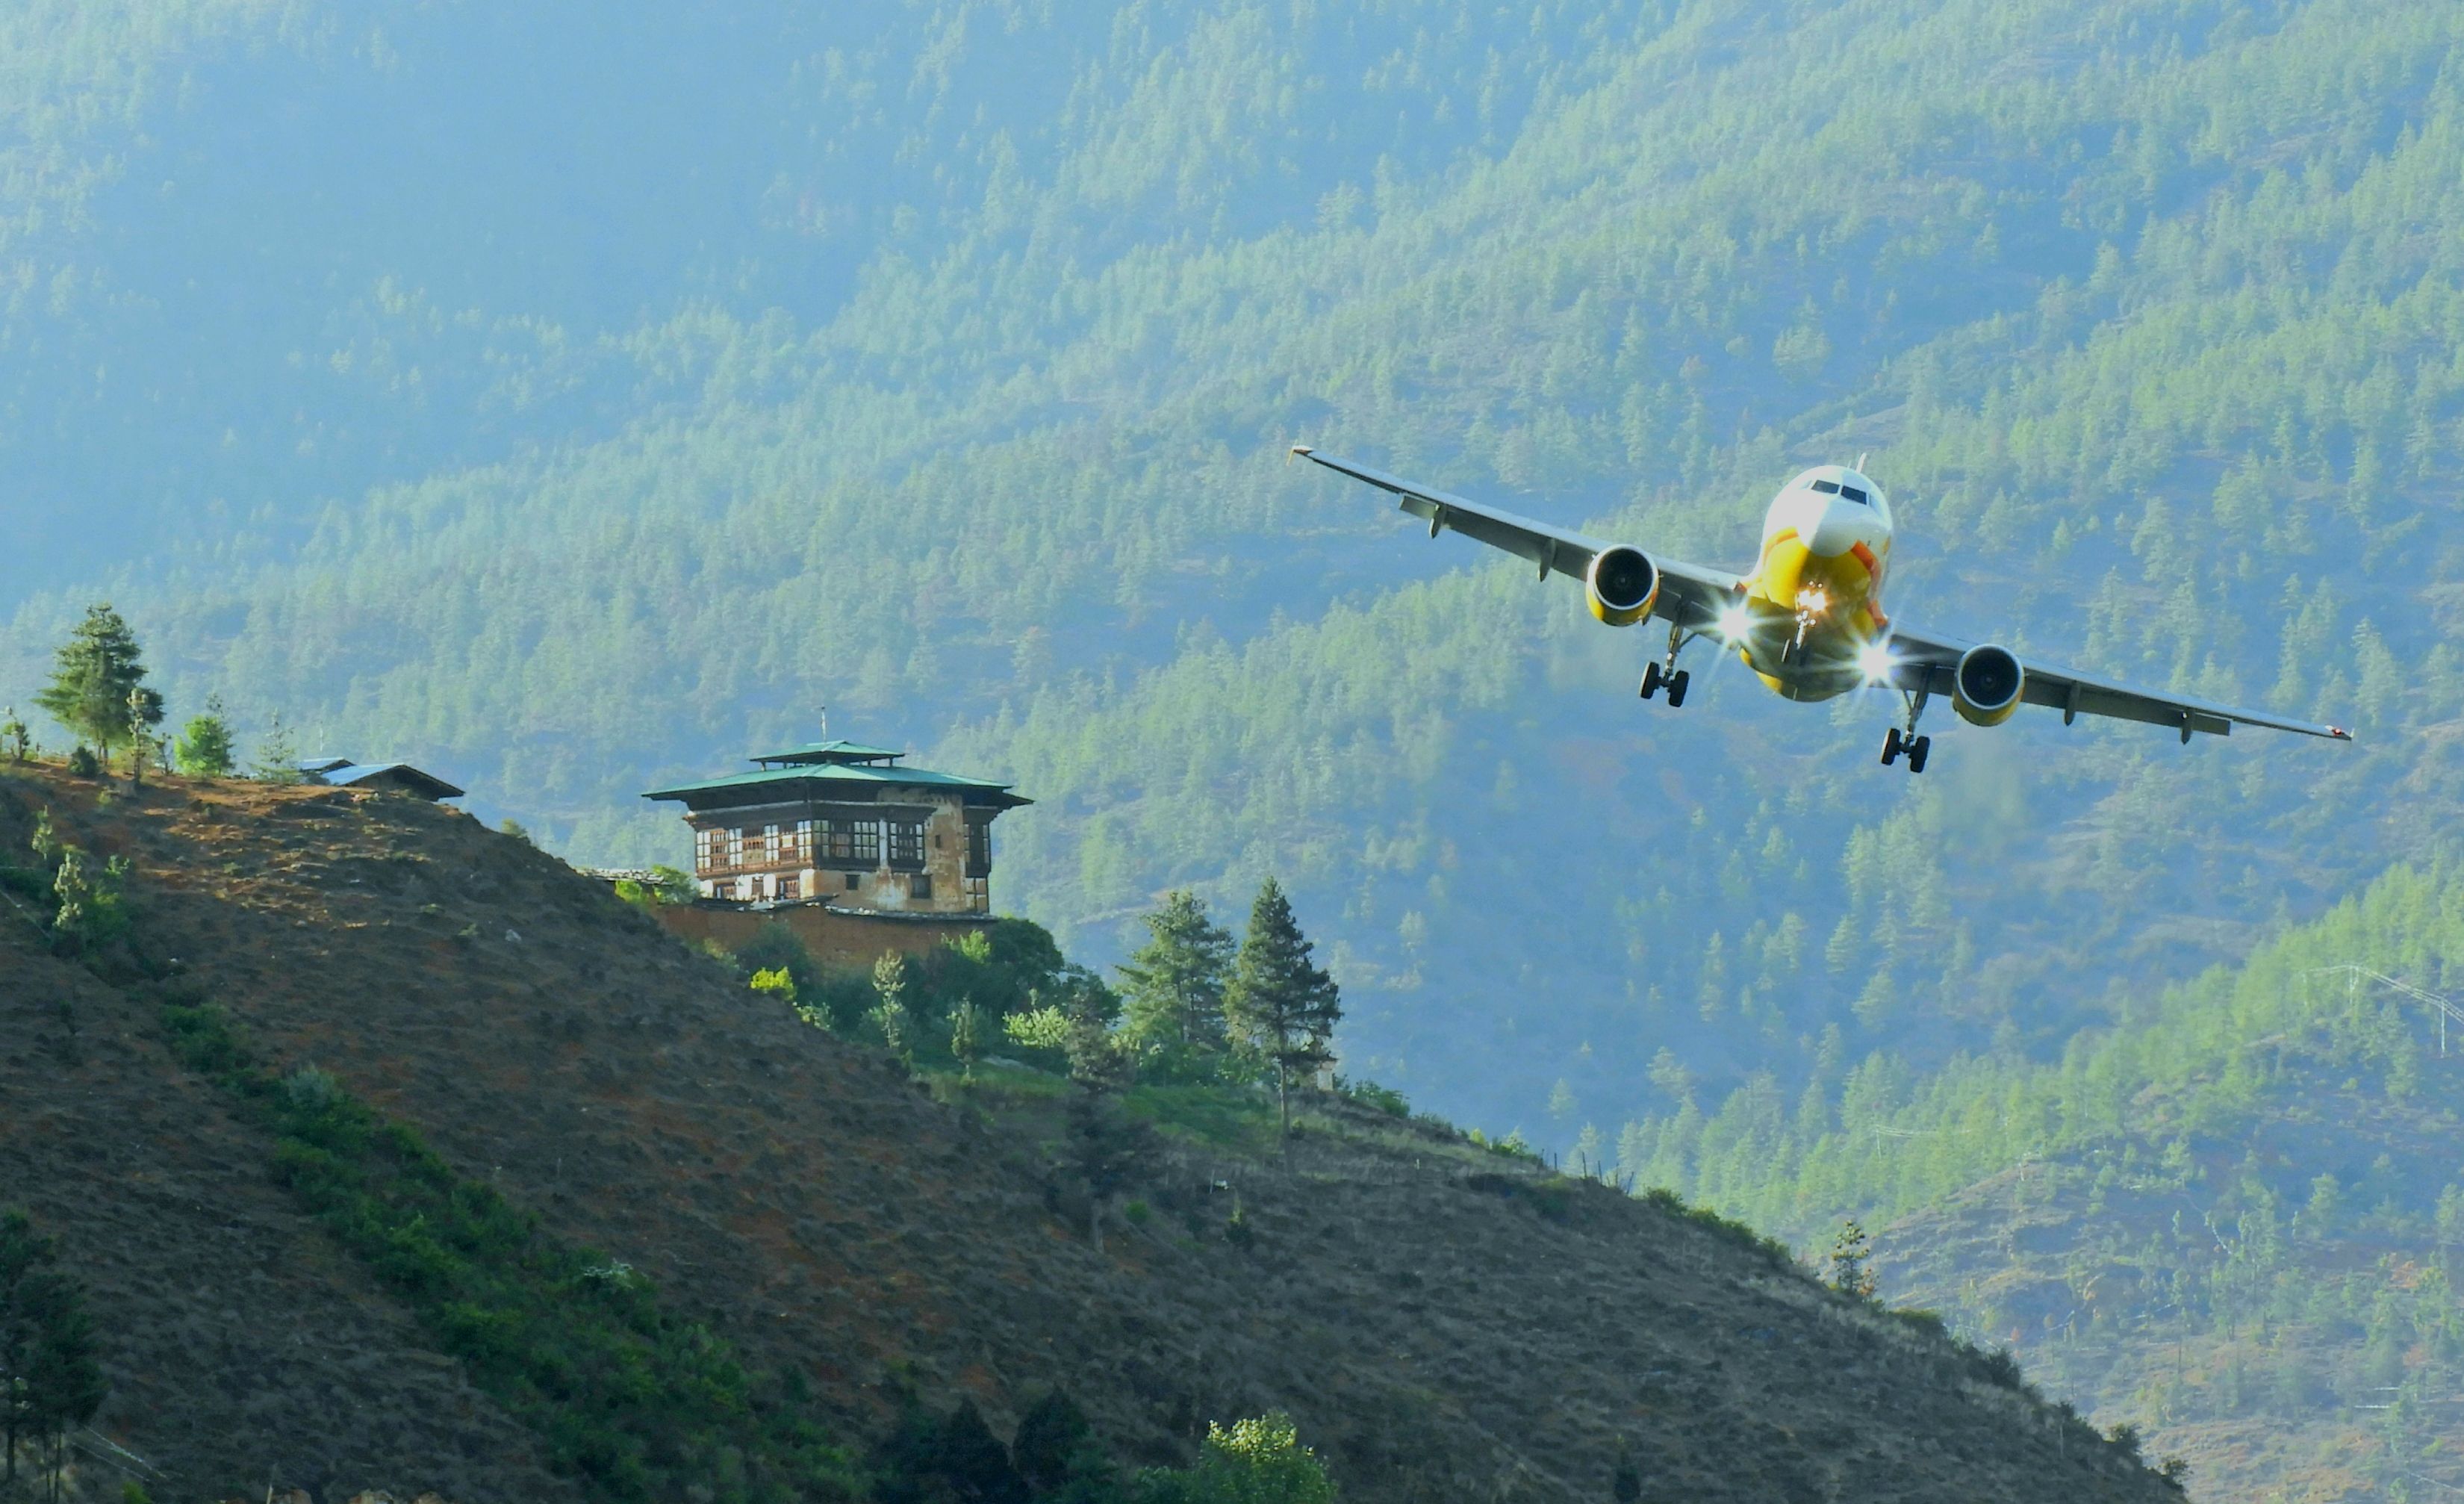 Bhutan Airlines Launches ‘Bring Your Own Device’ Inflight Entertainment